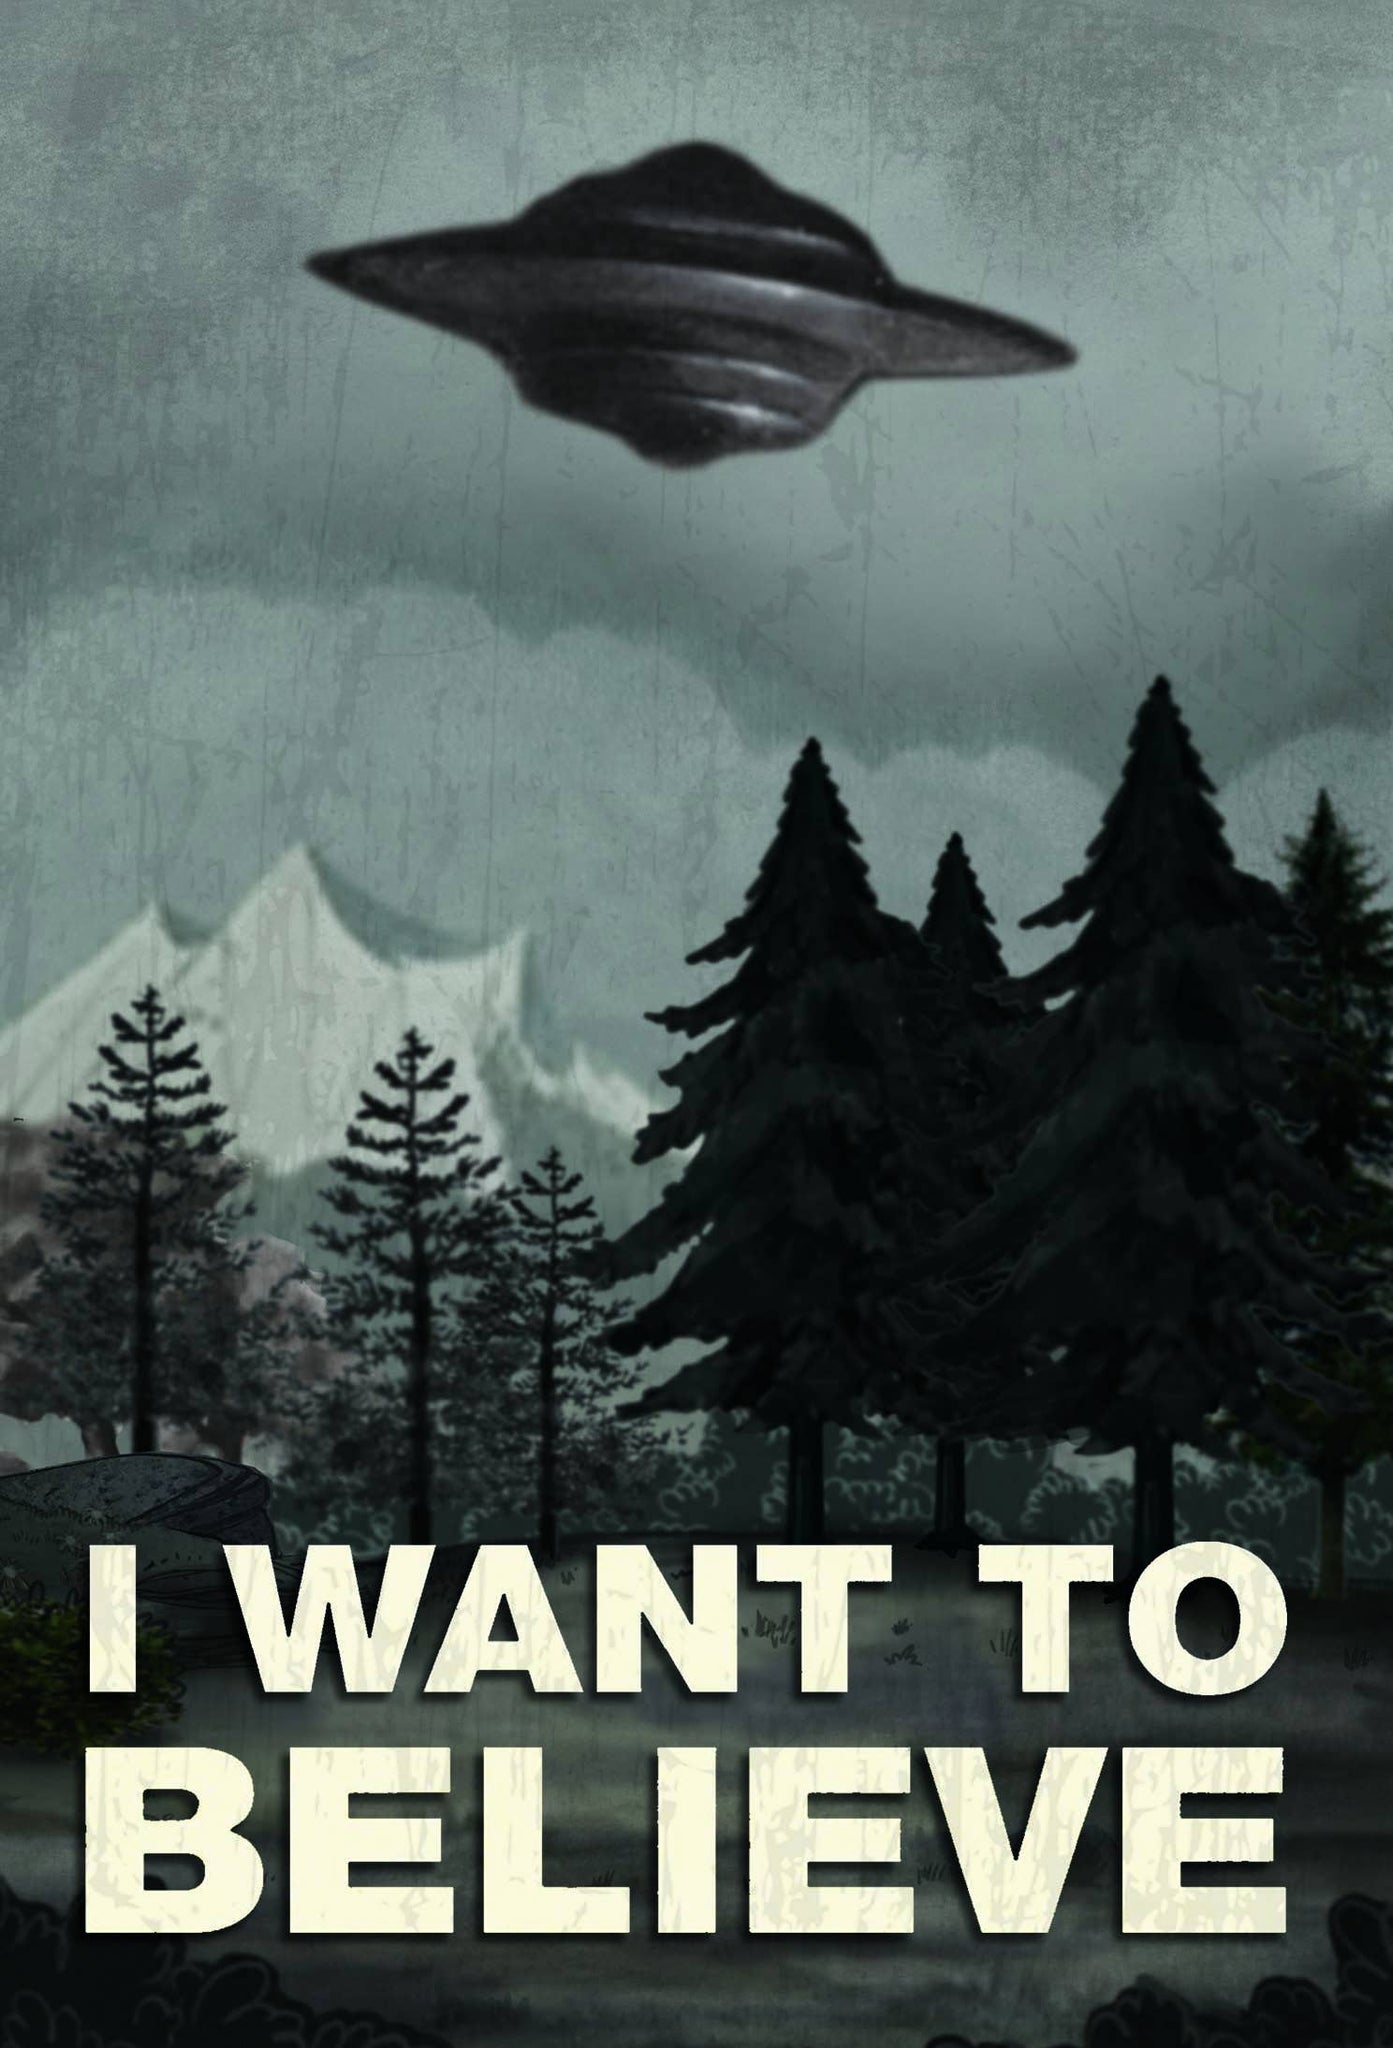 UFO Conspiracy Postcard "I Want To Believe"